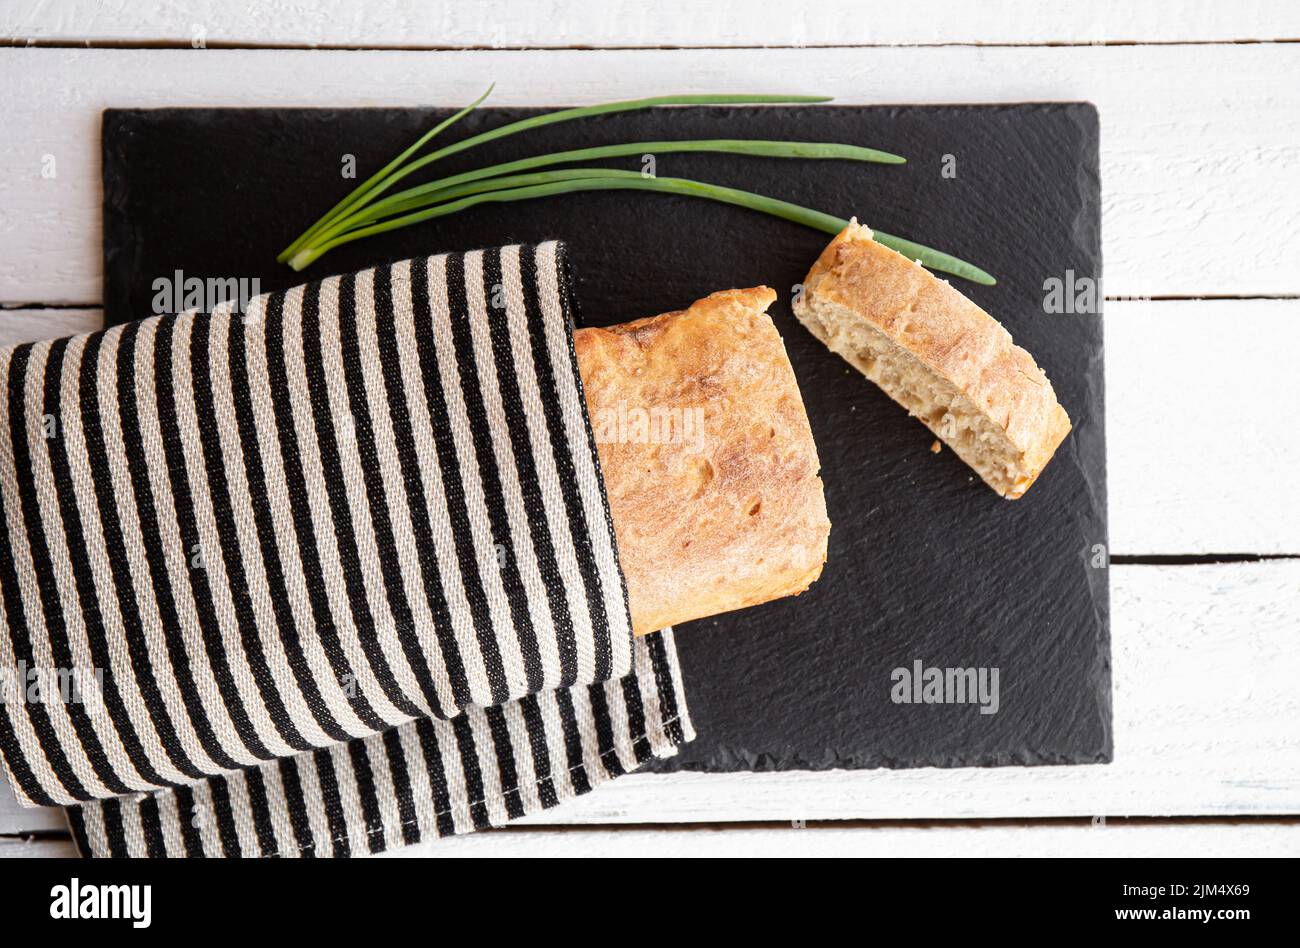 Flat lay view freshly baked homemade wheat flour loaf of bread on black stone serving board in home kitchen. Stock Photo